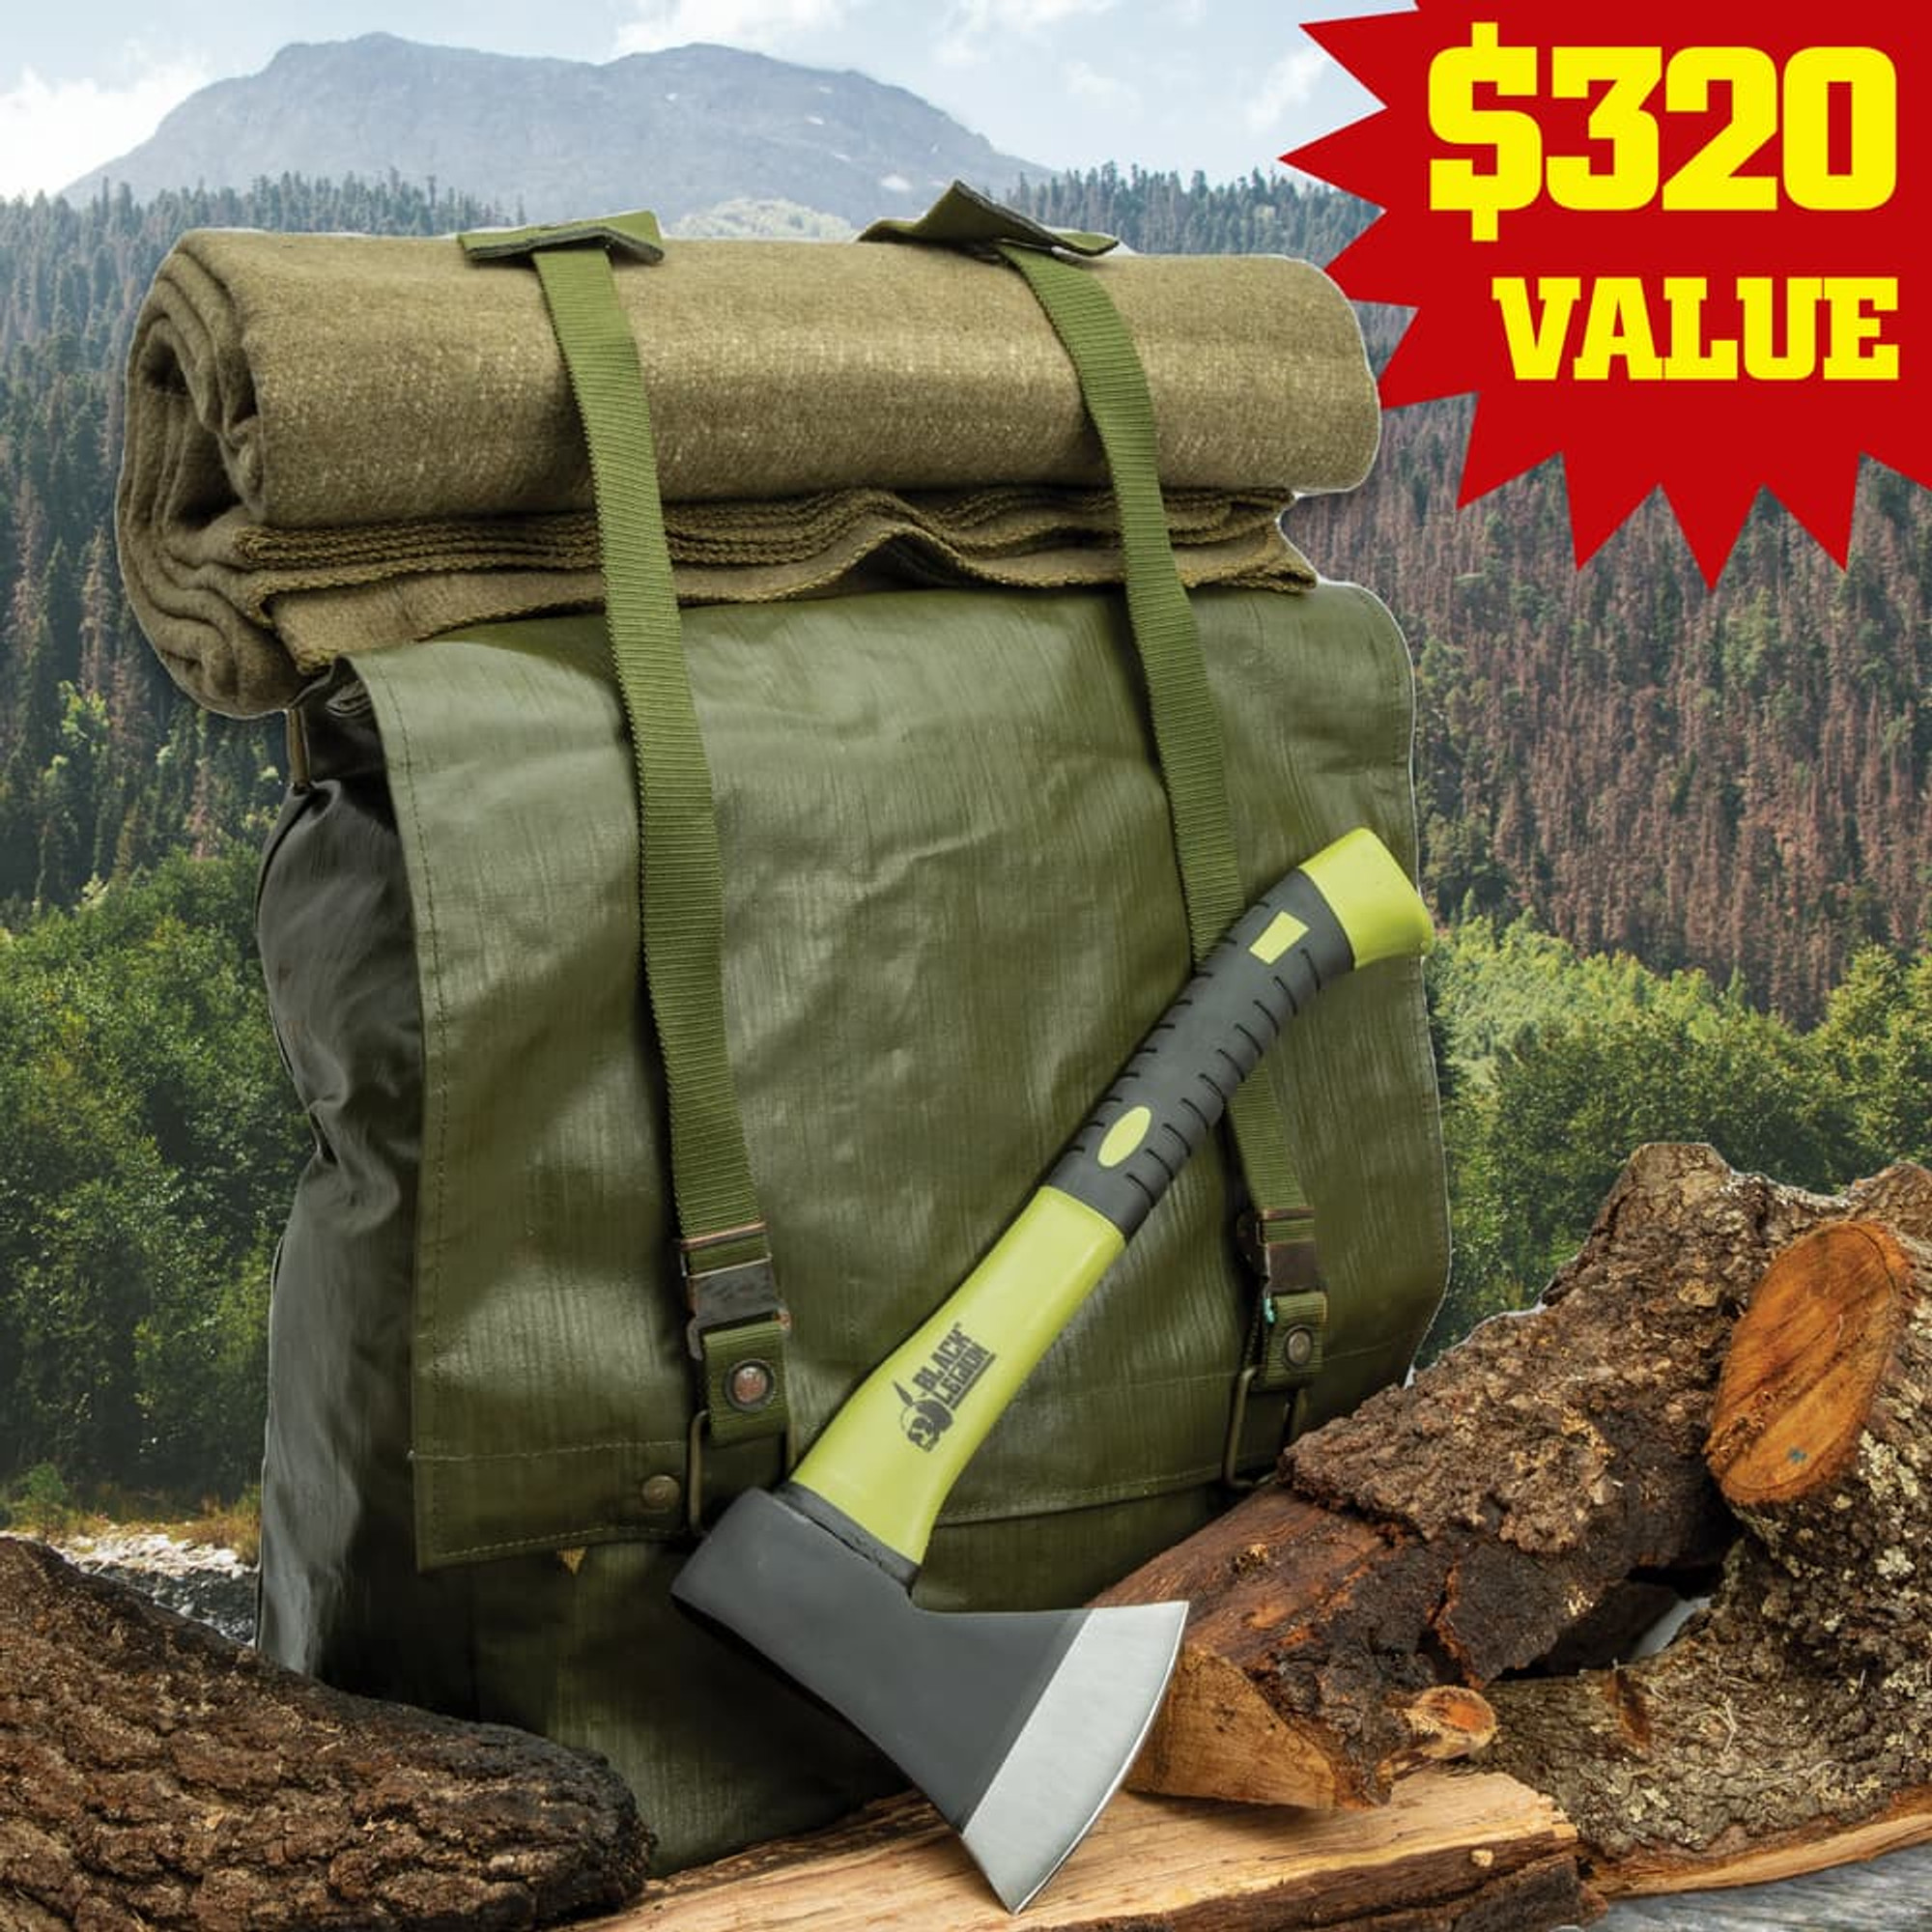 Wilderness Bugout Mystery Bag - Includes Swiss Army Wool Blanket, Camping Hatchet, Variety Of Emergency Gear, $320 Value